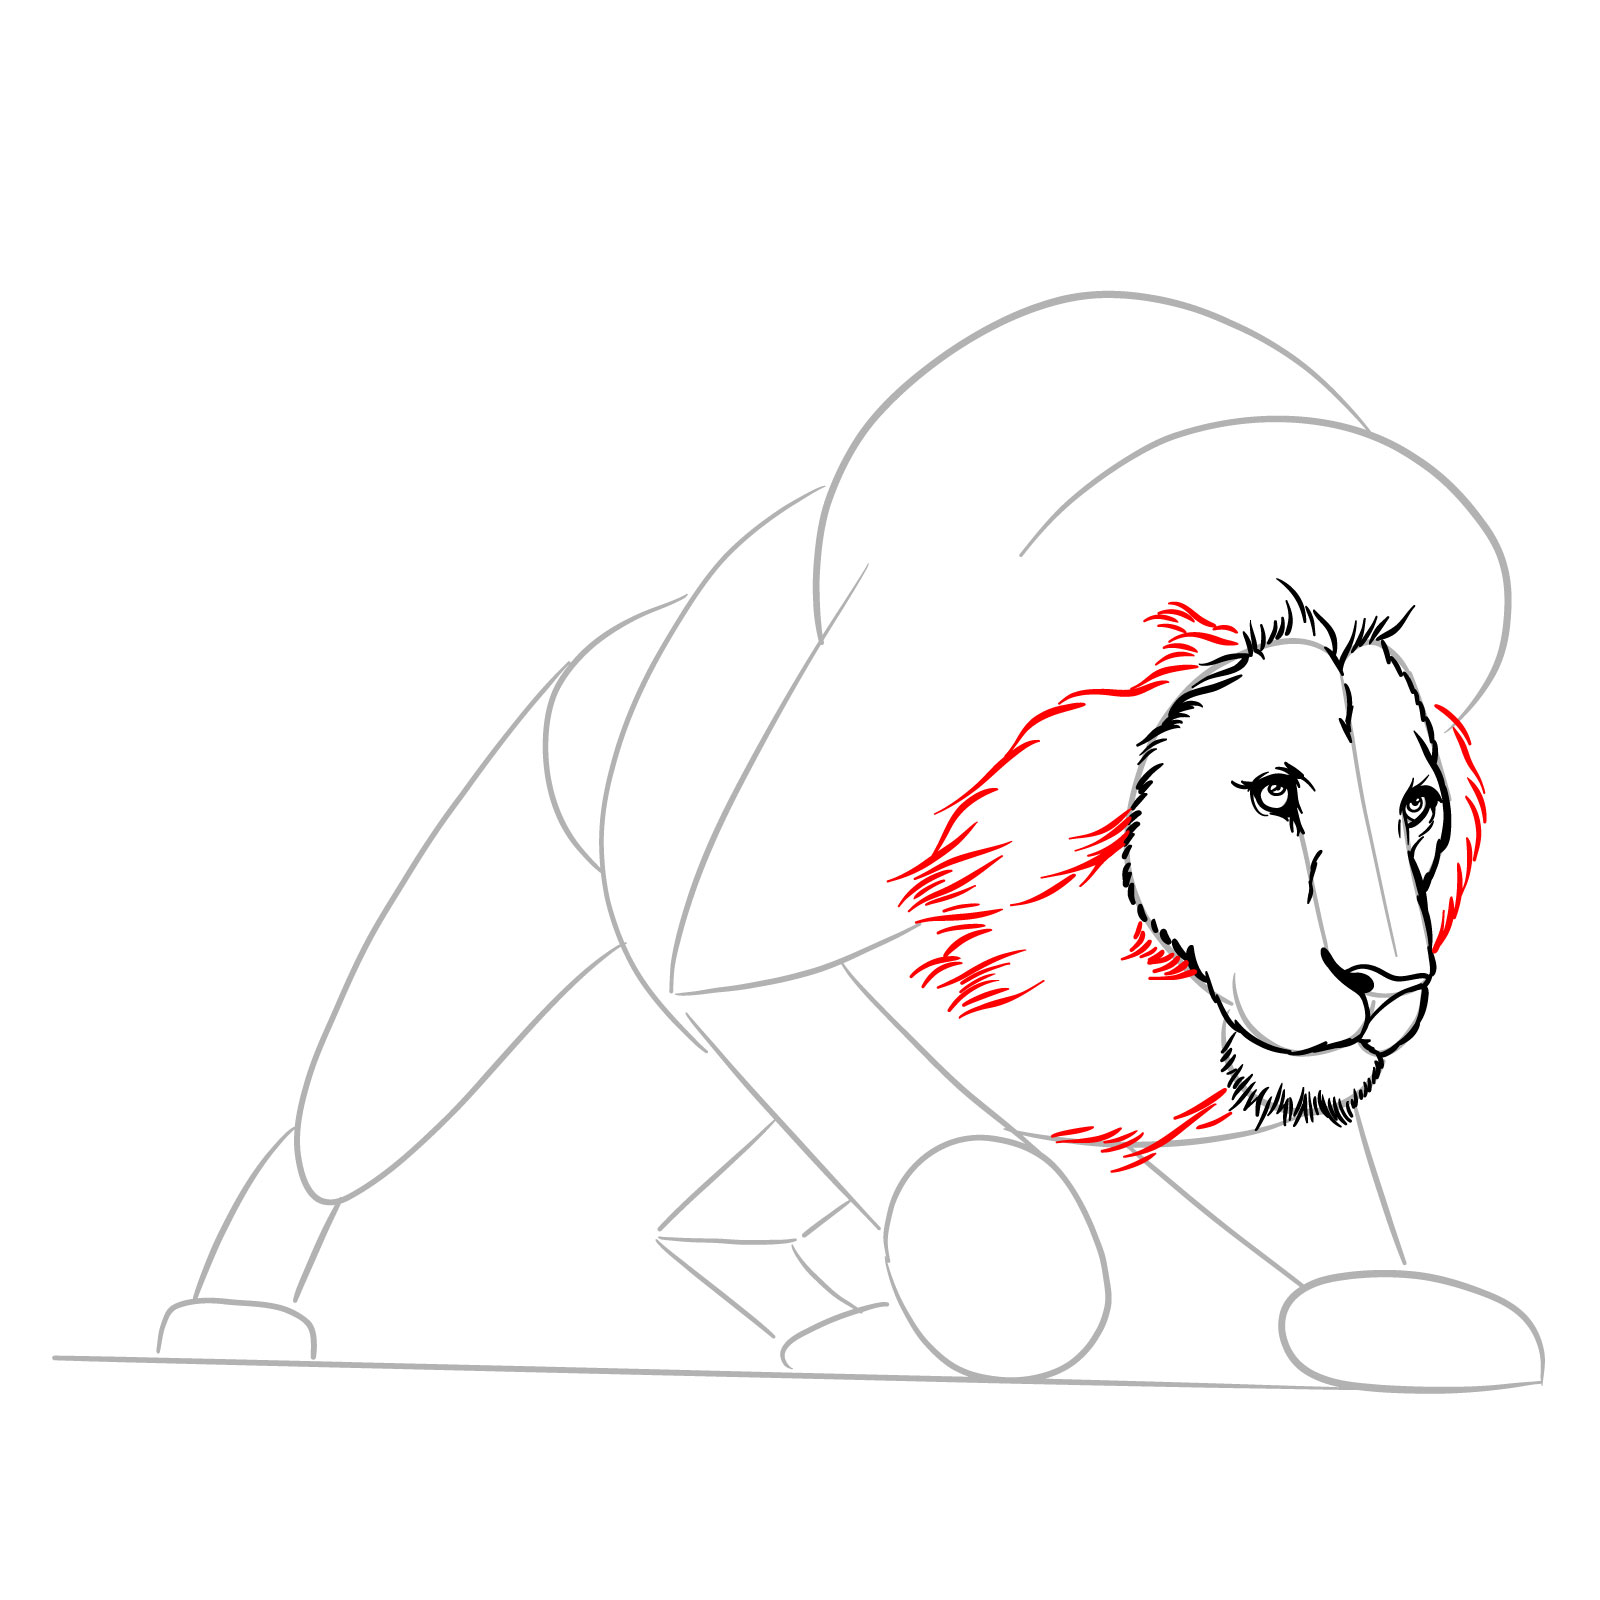 How to draw a hunting lion - Step 9: Sketching the mane